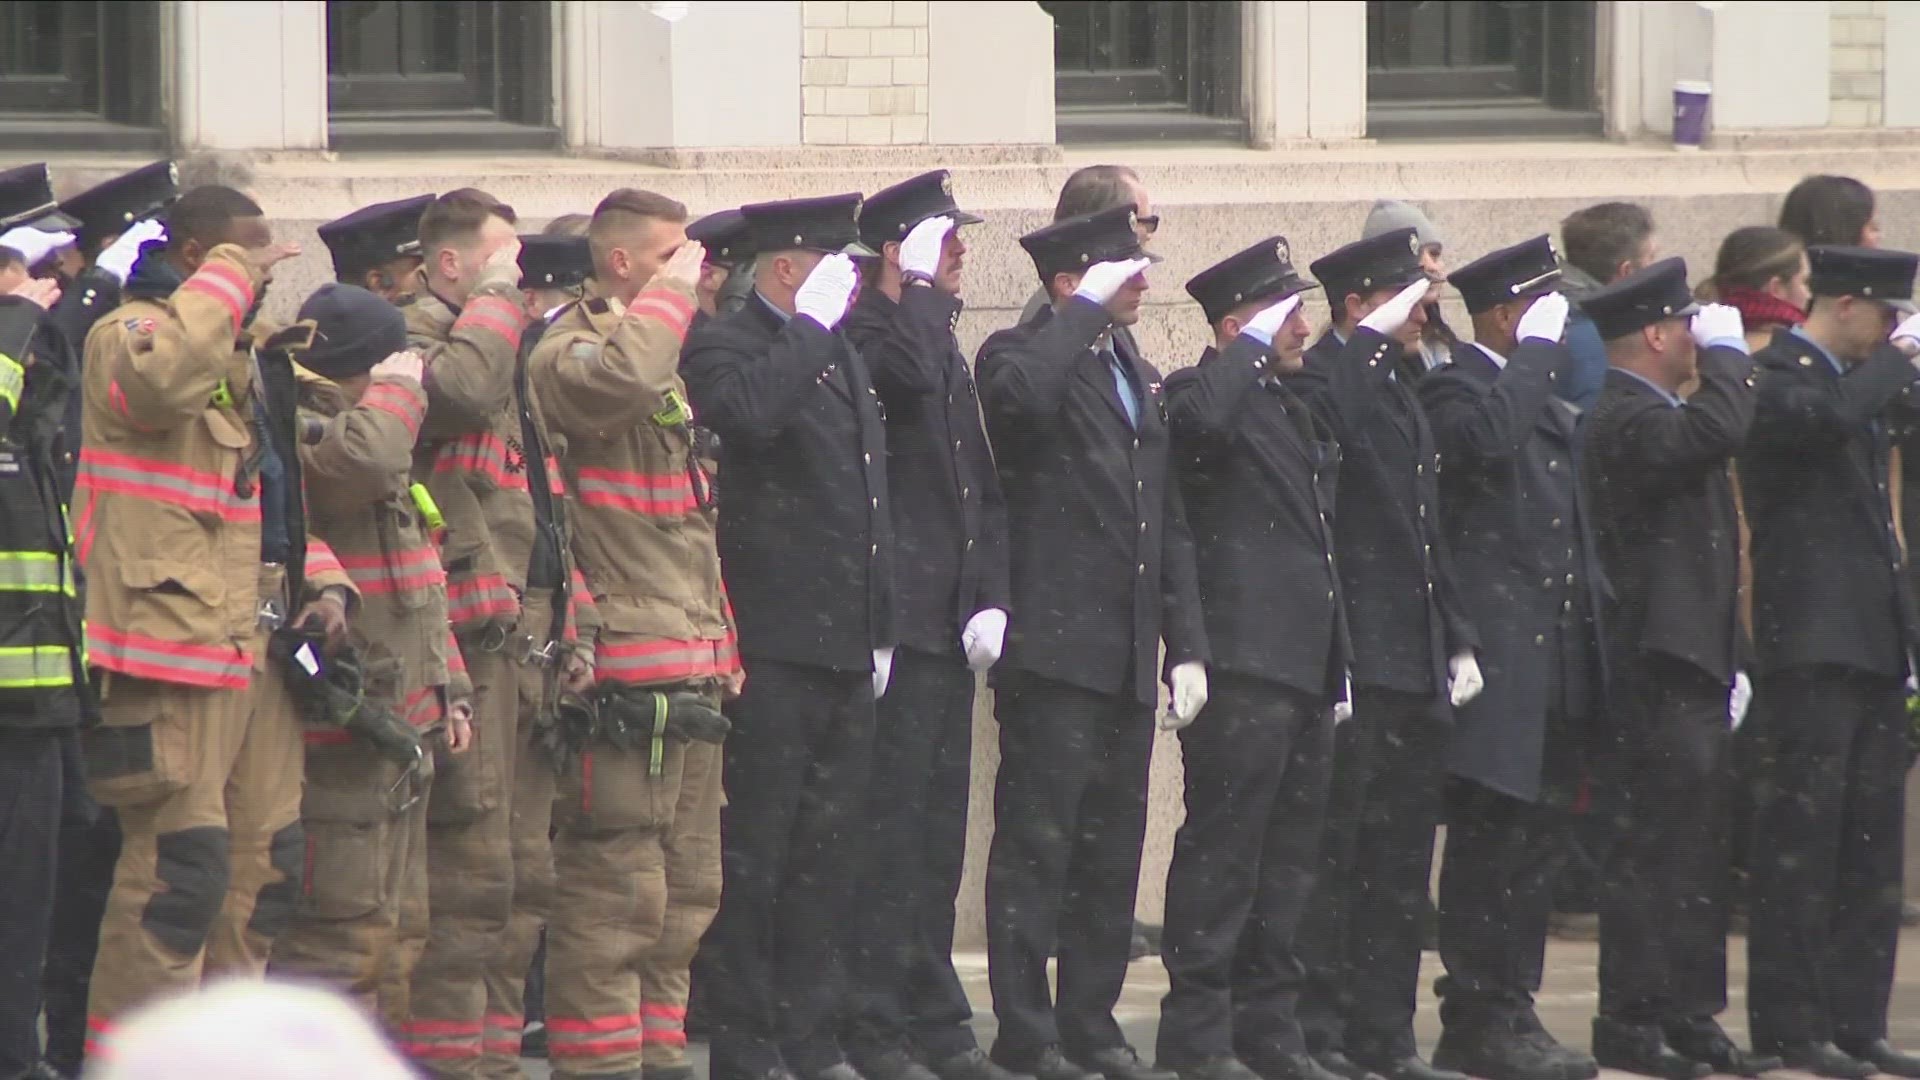 Firefighters from California, Florida, Maryland, Virginia, and even Canada came to Buffalo to show their support for Jason Arno and his family during the funeral.